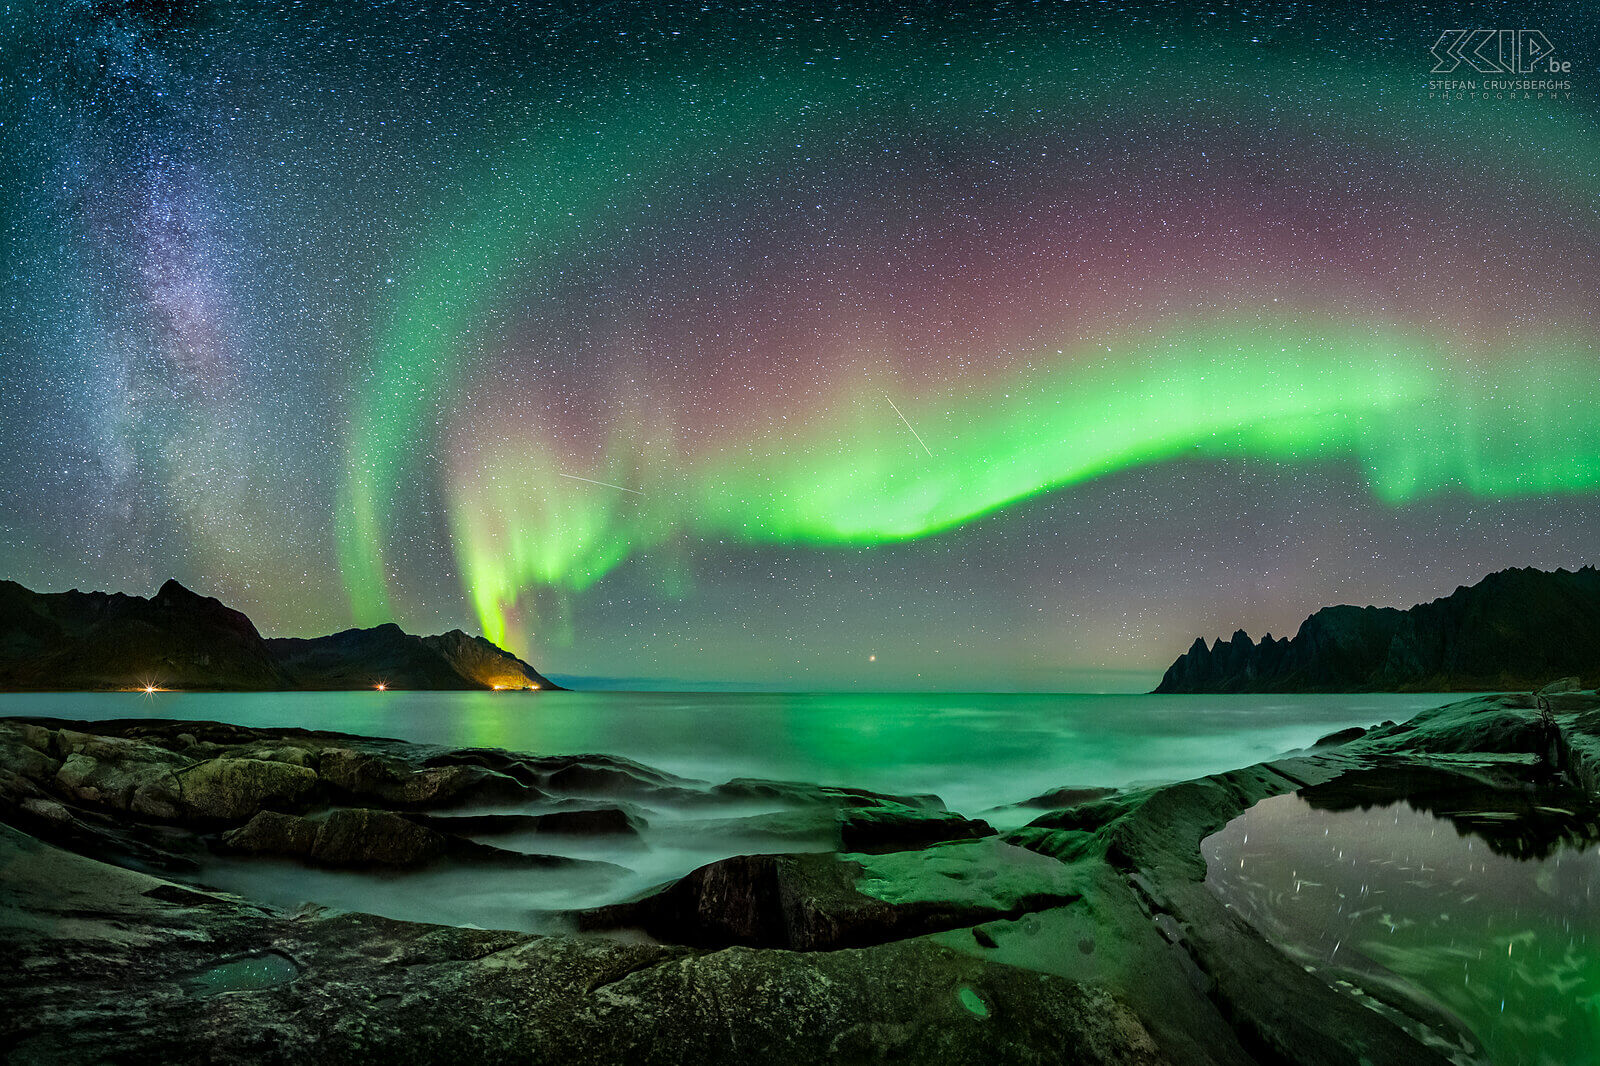 Norway - Senja - Tungeneset - Northern lights A panorama image of a magical night at the rocky beach of Tungeneset on Senja island in Norway. The northern lights (aurora borealis) were very active with wonderful green and red colors, the milky way was also visible and my camera captured some shooting stars. The bright star at the horizon in the middle of the image is Arcturus. Stefan Cruysberghs